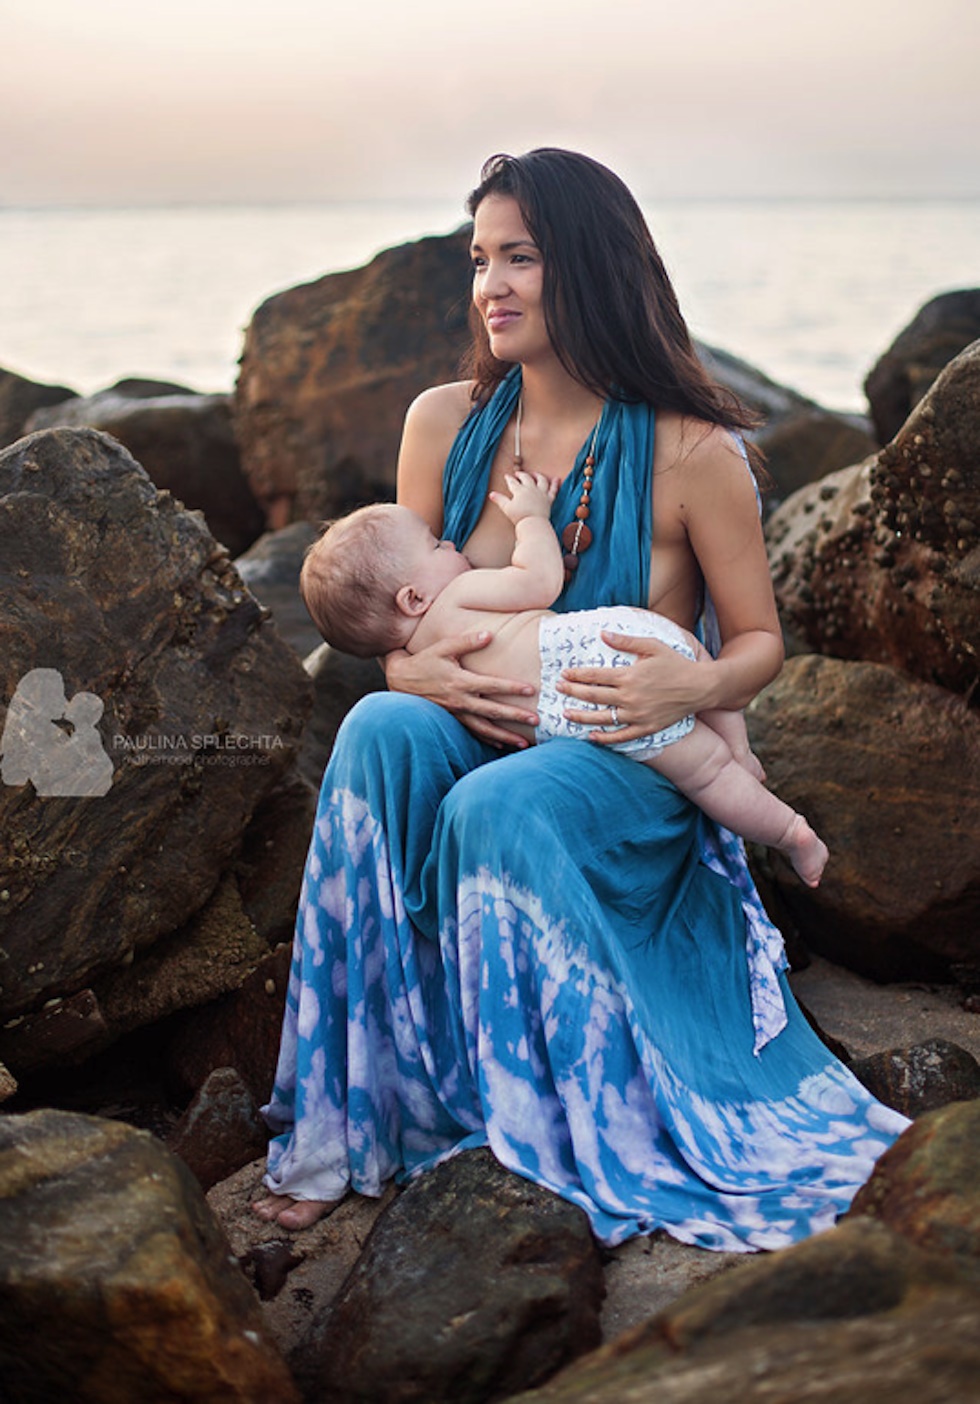 19 Intimate Photos of Mothers and Their Babies That Show the Beauty of Breastfeeding 15